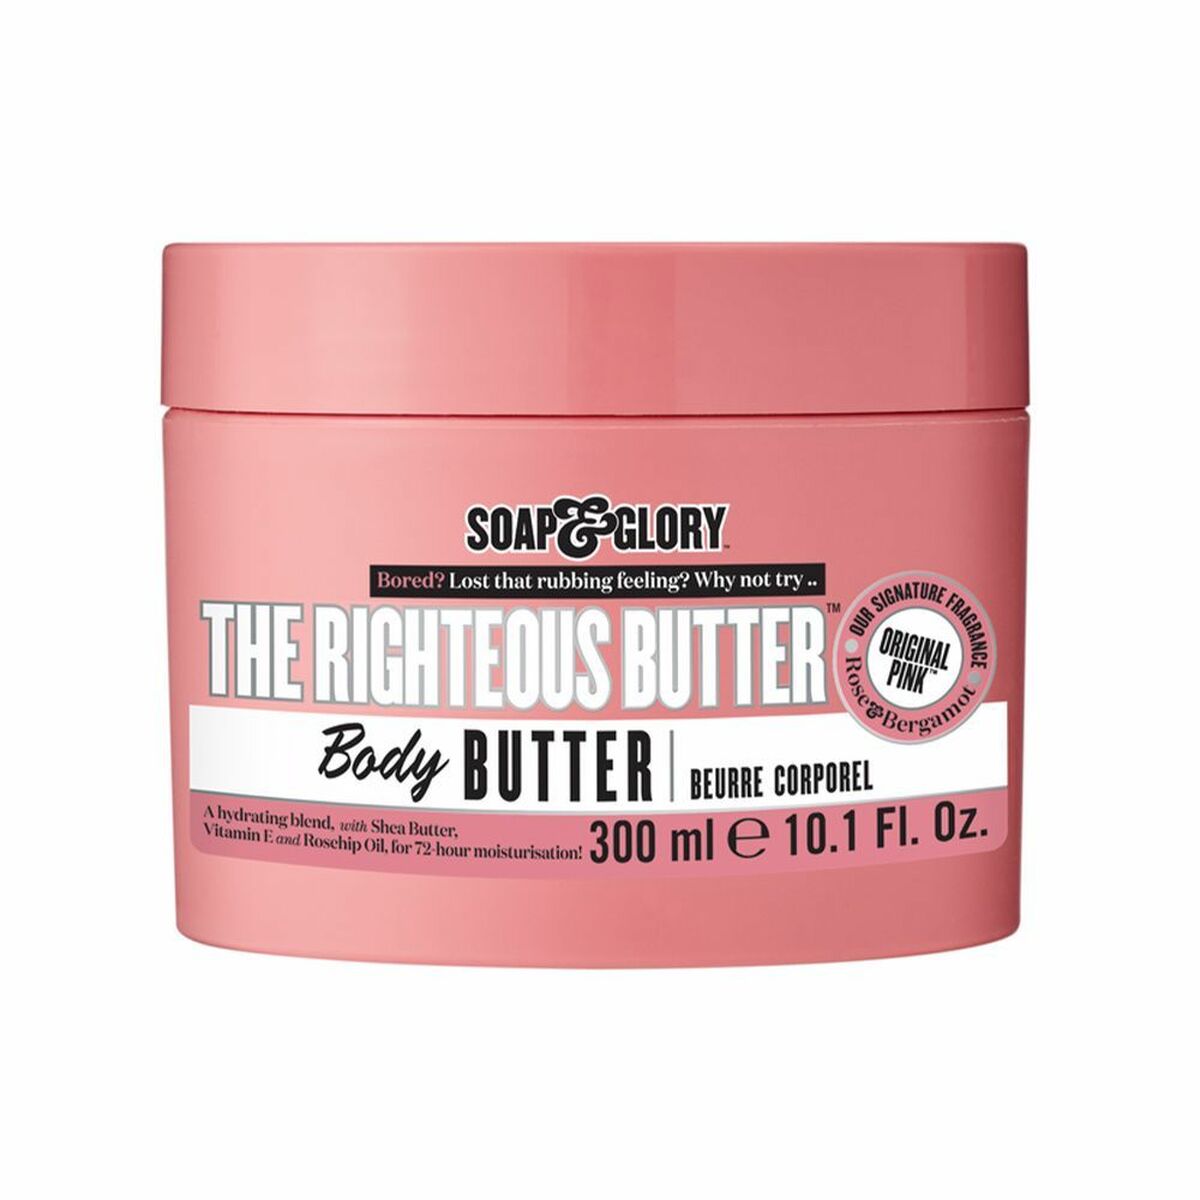 Body Butter The Righteous Butter Soap & Glory 5.0451E+12 300 ml